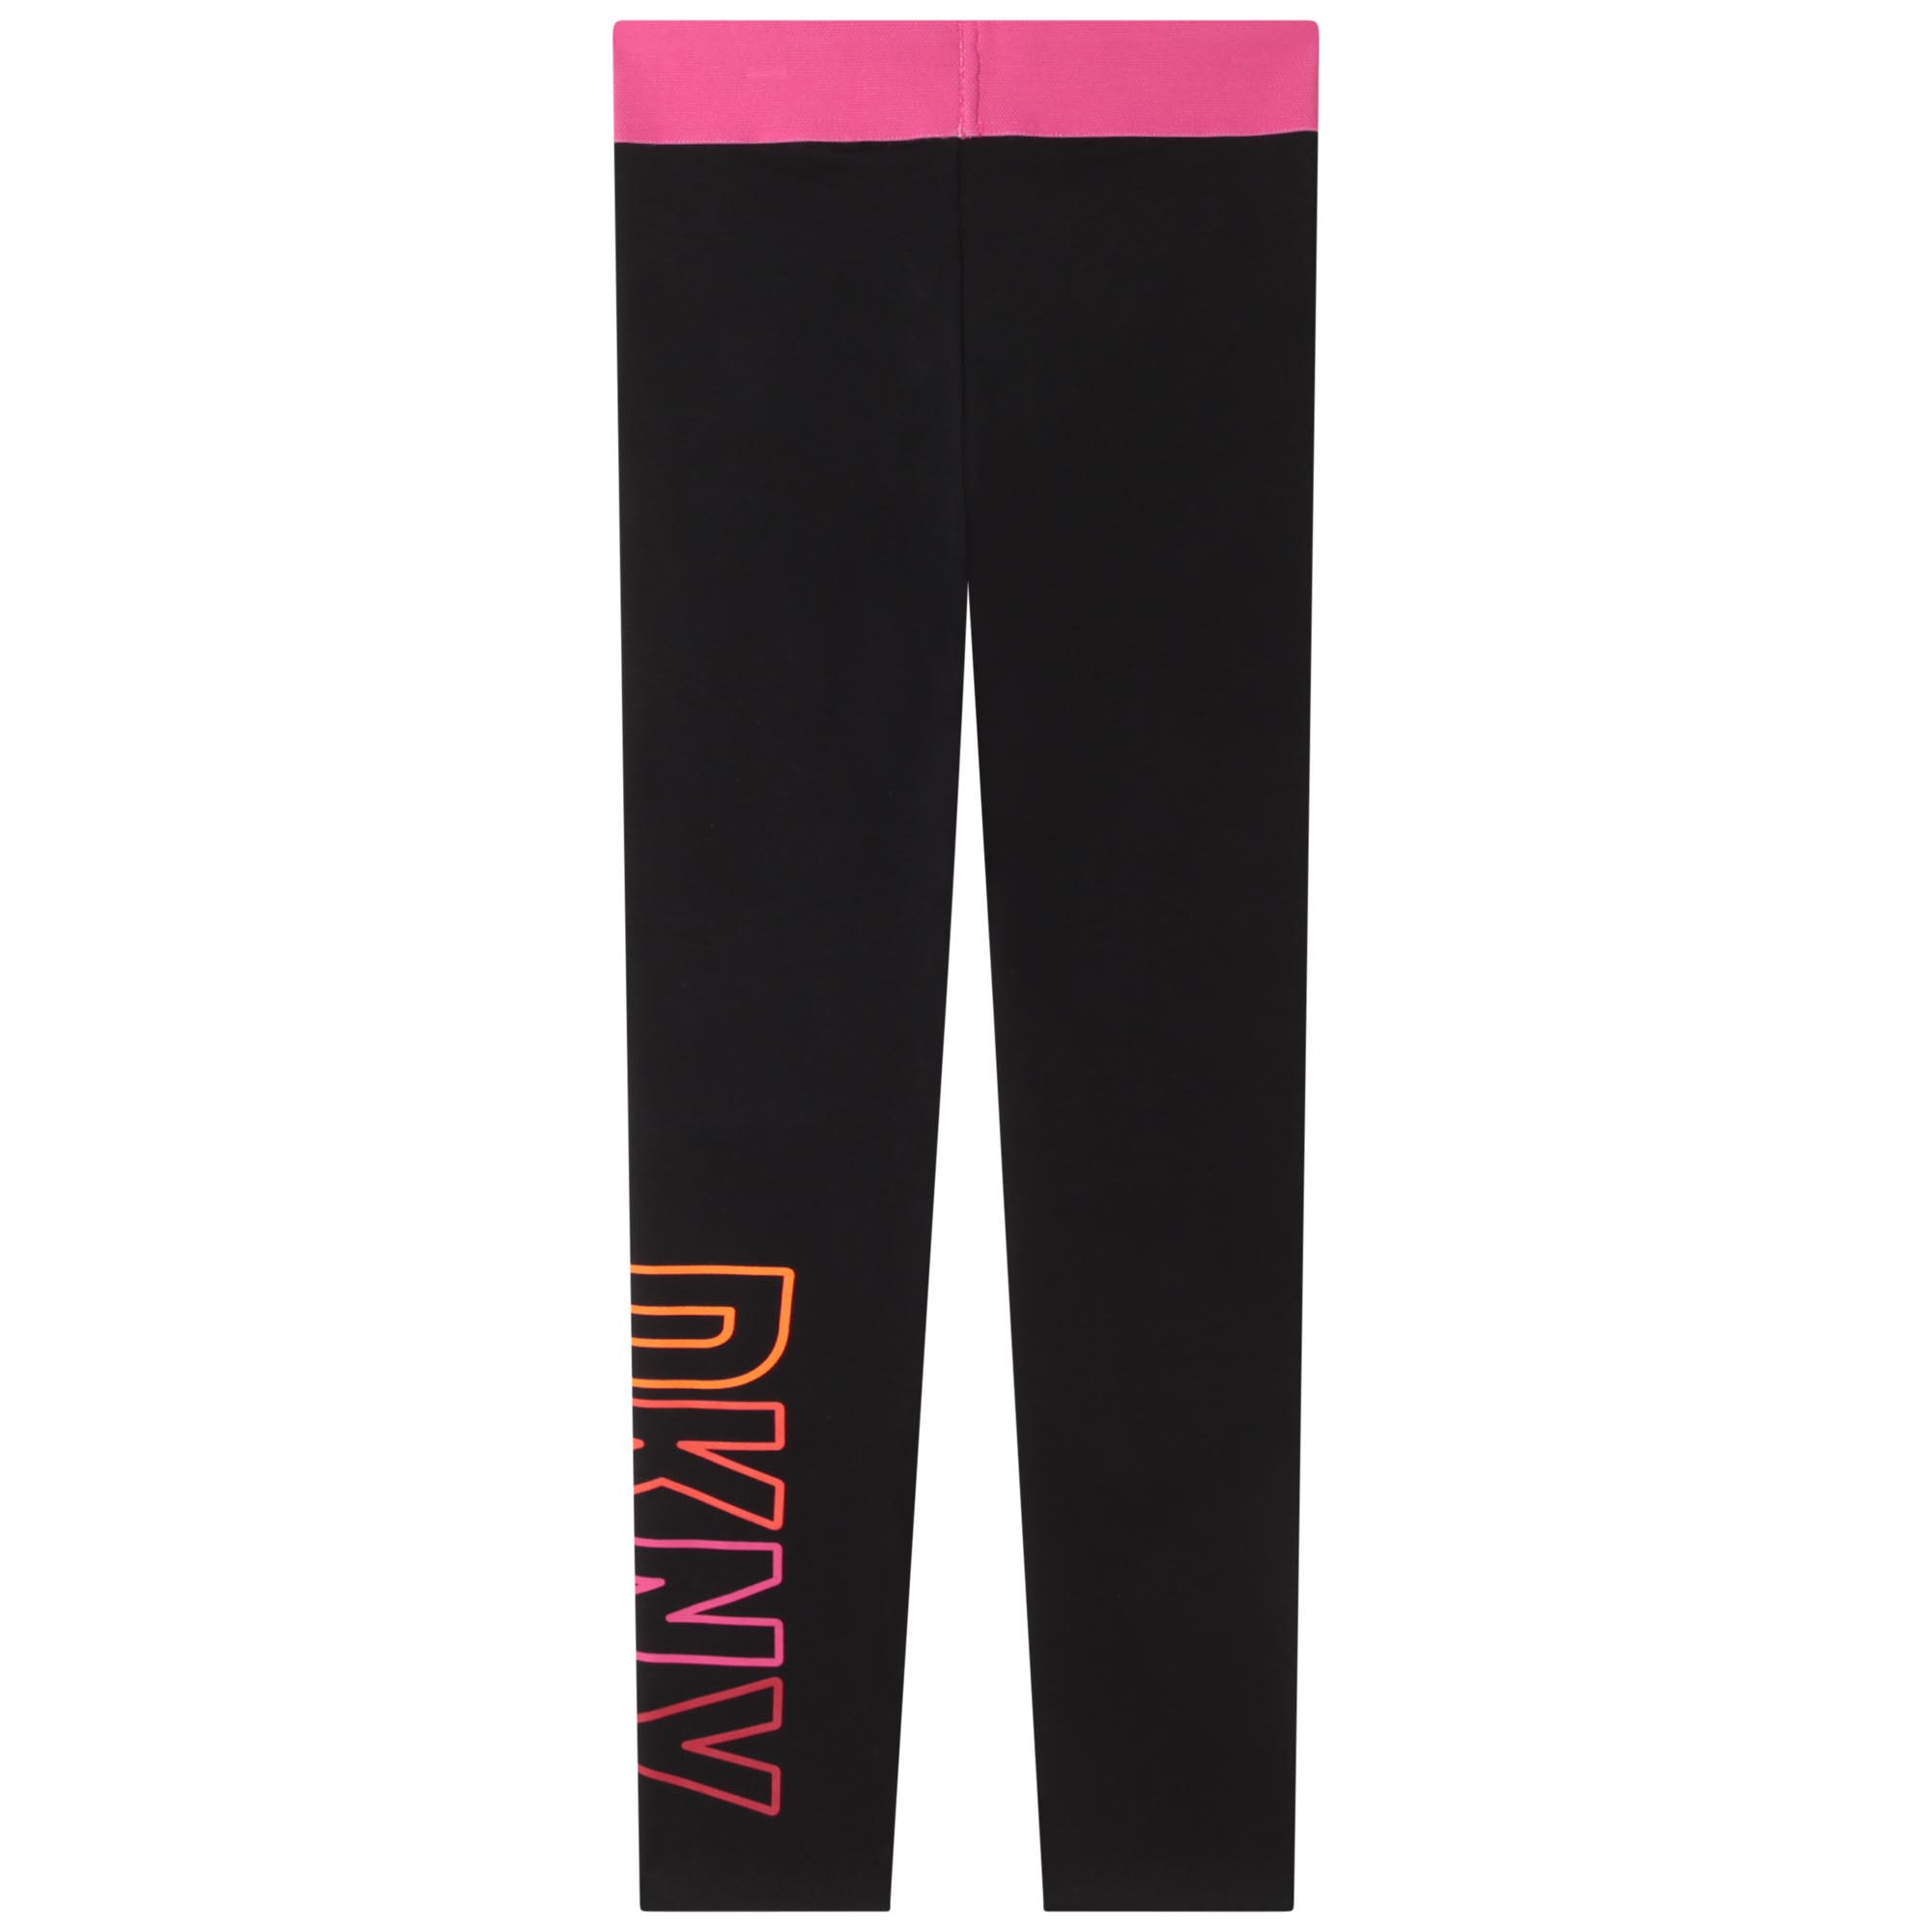 DKNY black leggings with pink waist band back view